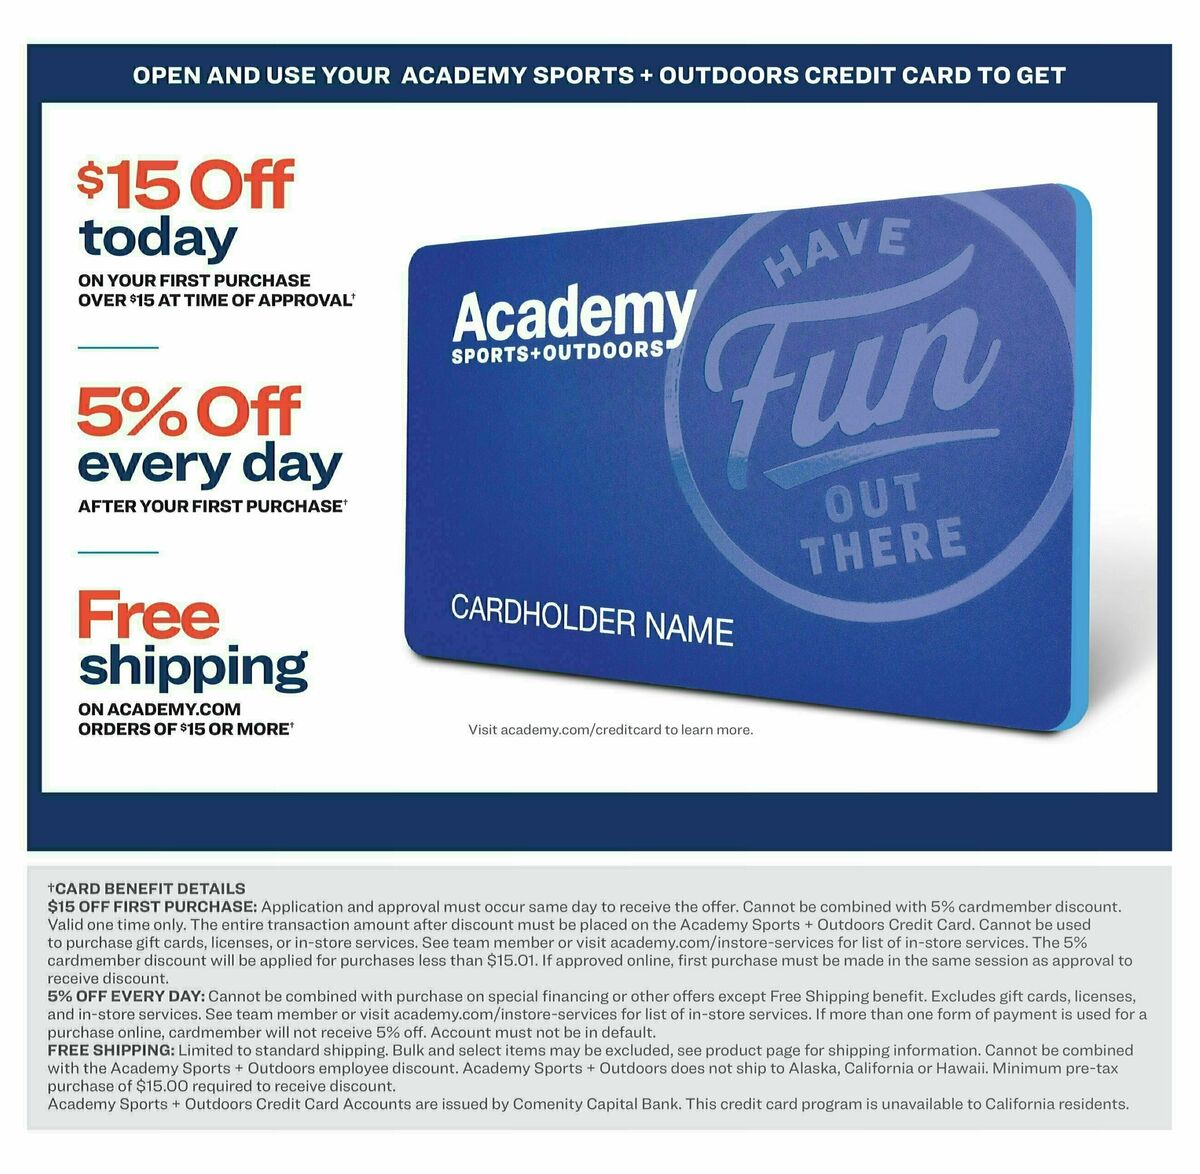 Academy Sports + Outdoors 4-Day Sale Weekly Ad from July 20